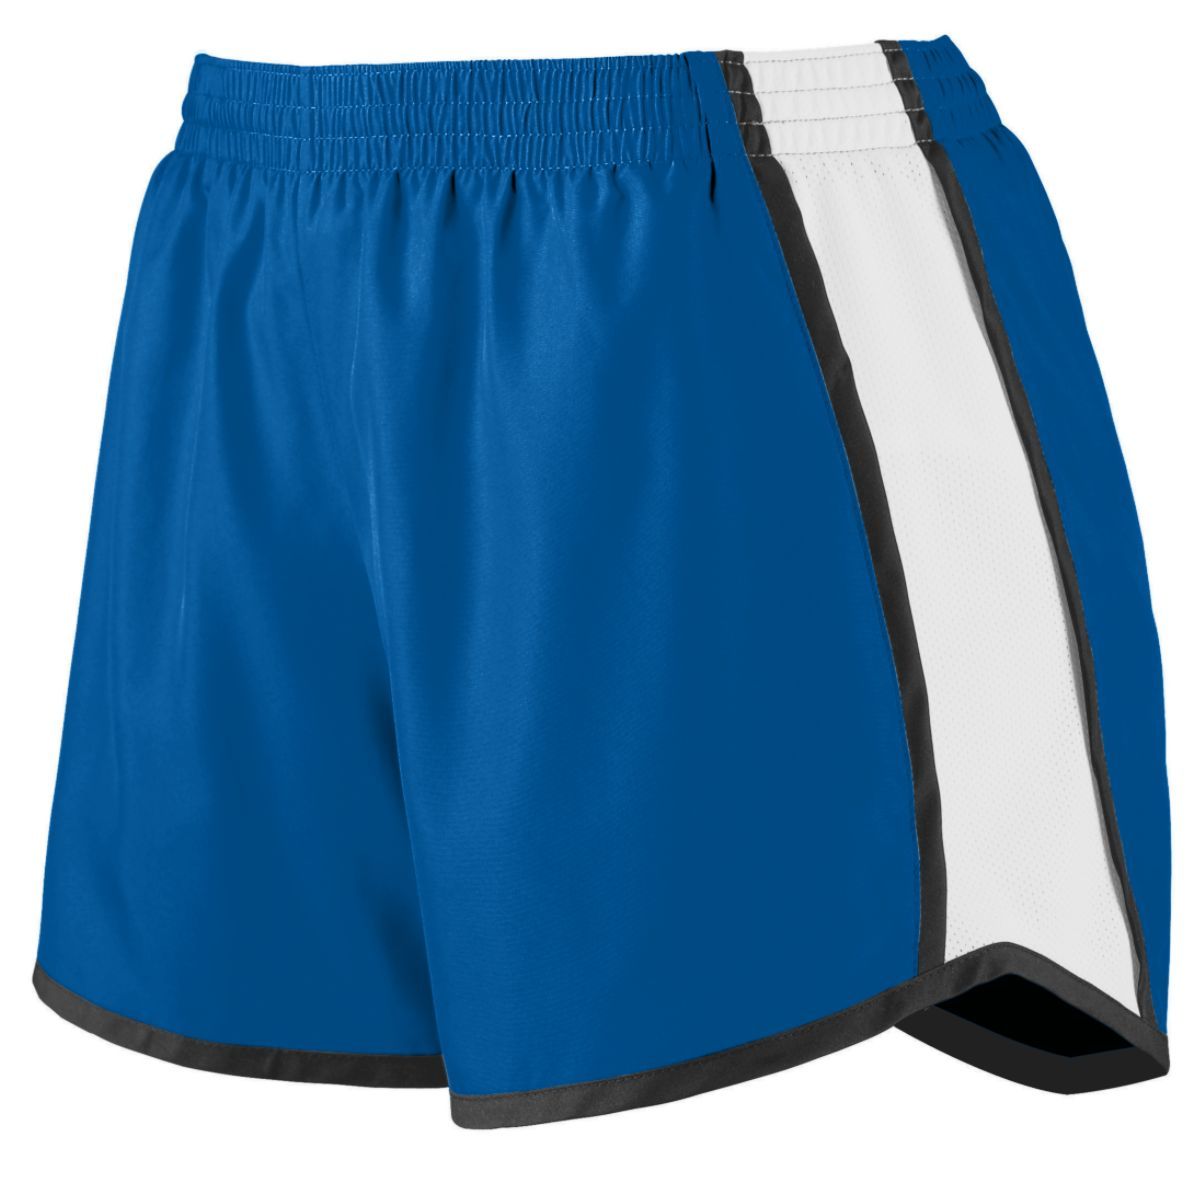 Augusta Sportswear Girls Pulse Team Shorts in Royal/White/Black  -Part of the Girls, Augusta-Products, Volleyball, Girls-Shorts product lines at KanaleyCreations.com